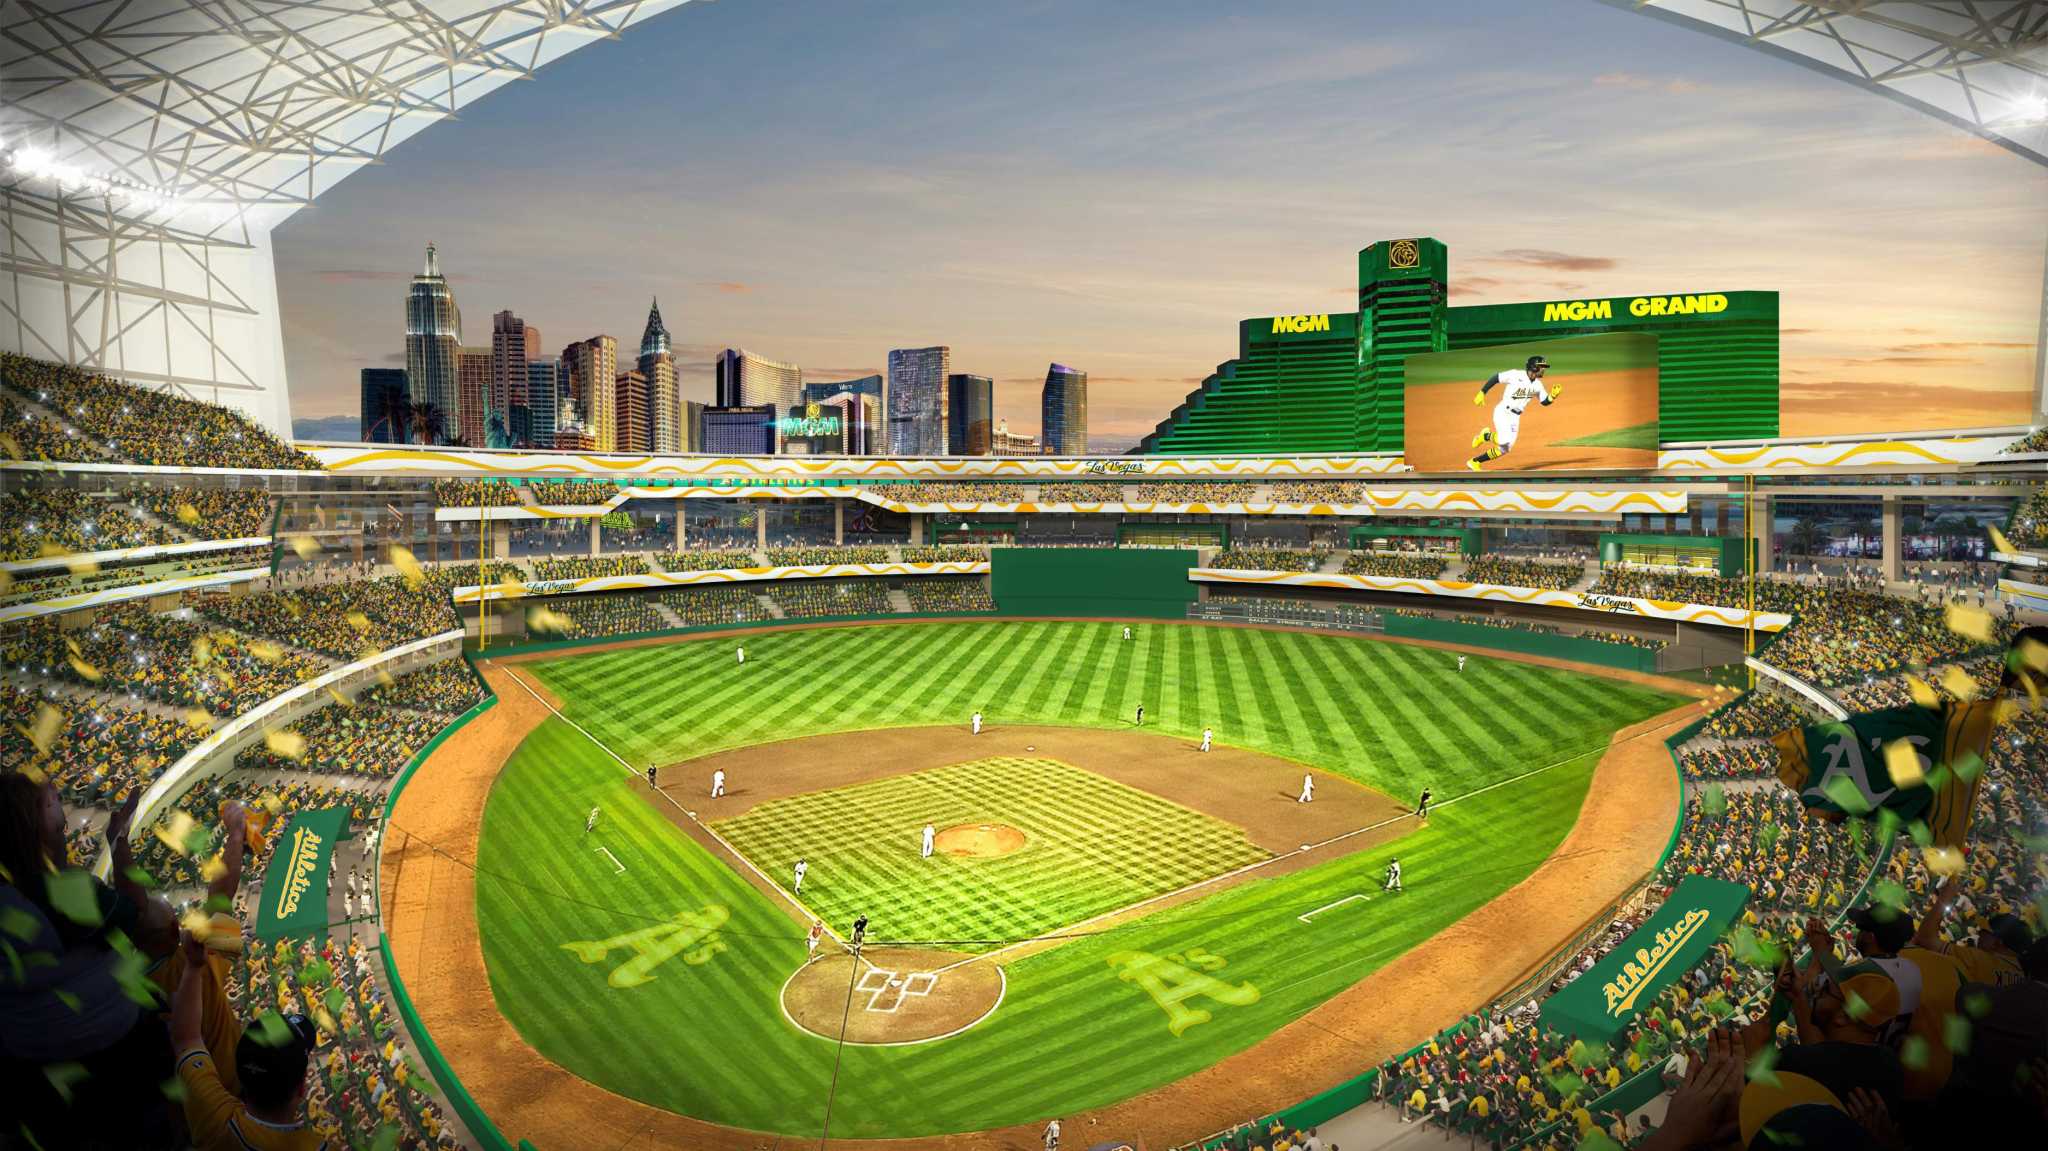 So the Oakland A's want to move into Dodger territory?